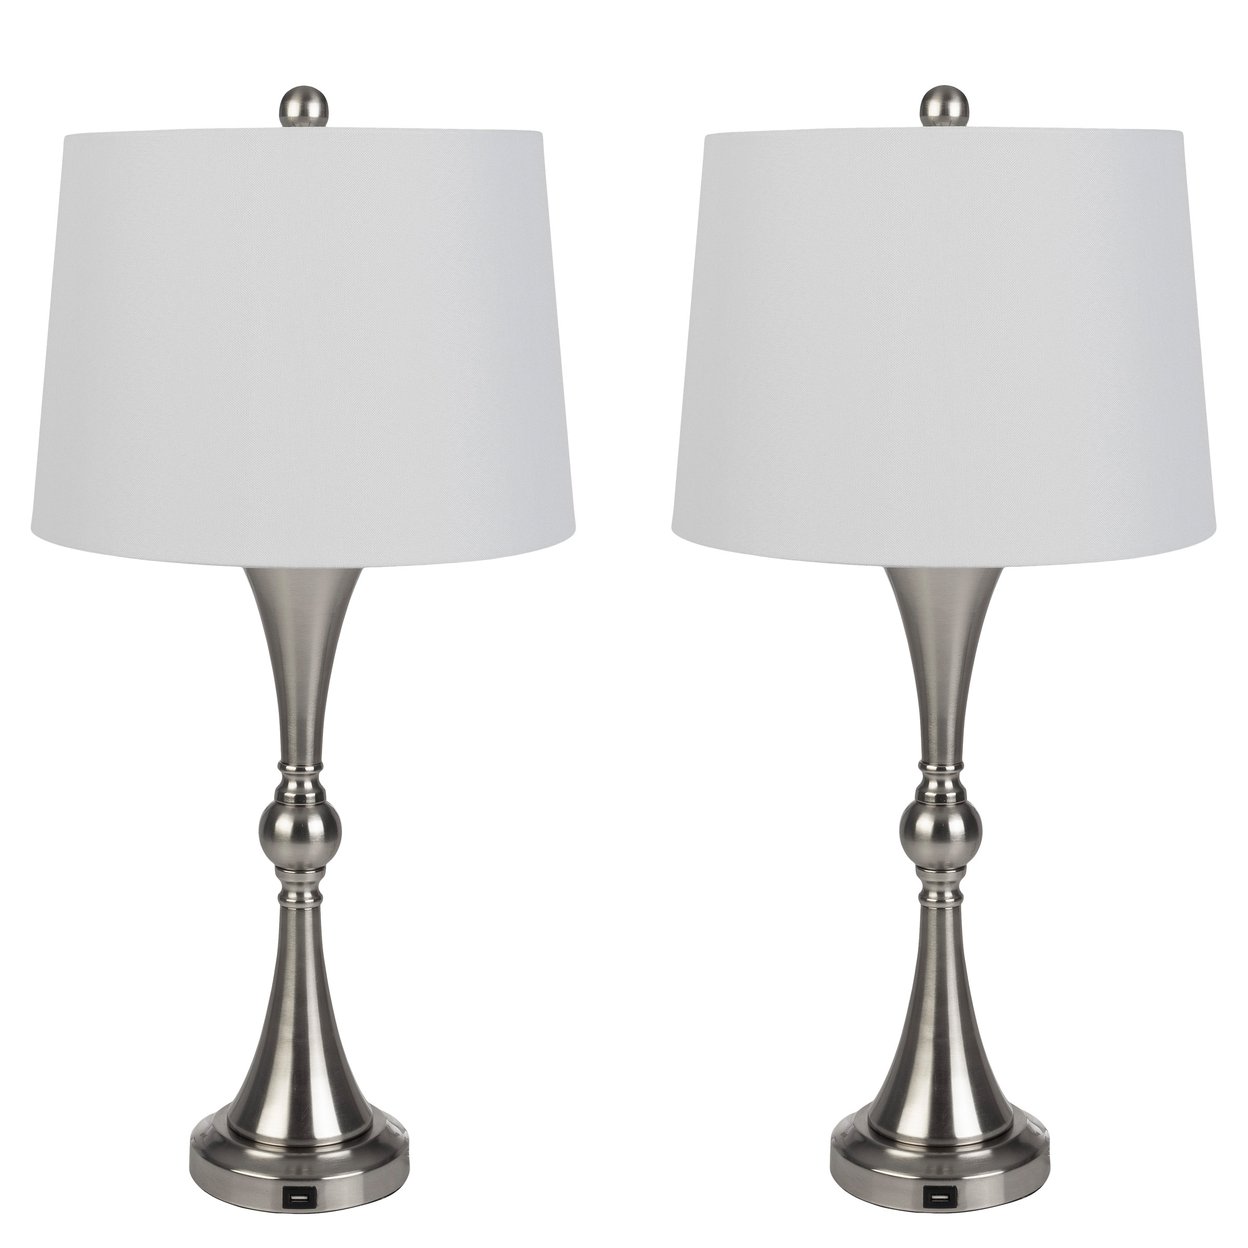 Set Of 2 Table Lamps USB Charging Ports Touch Control LED Bulbs Room Silver